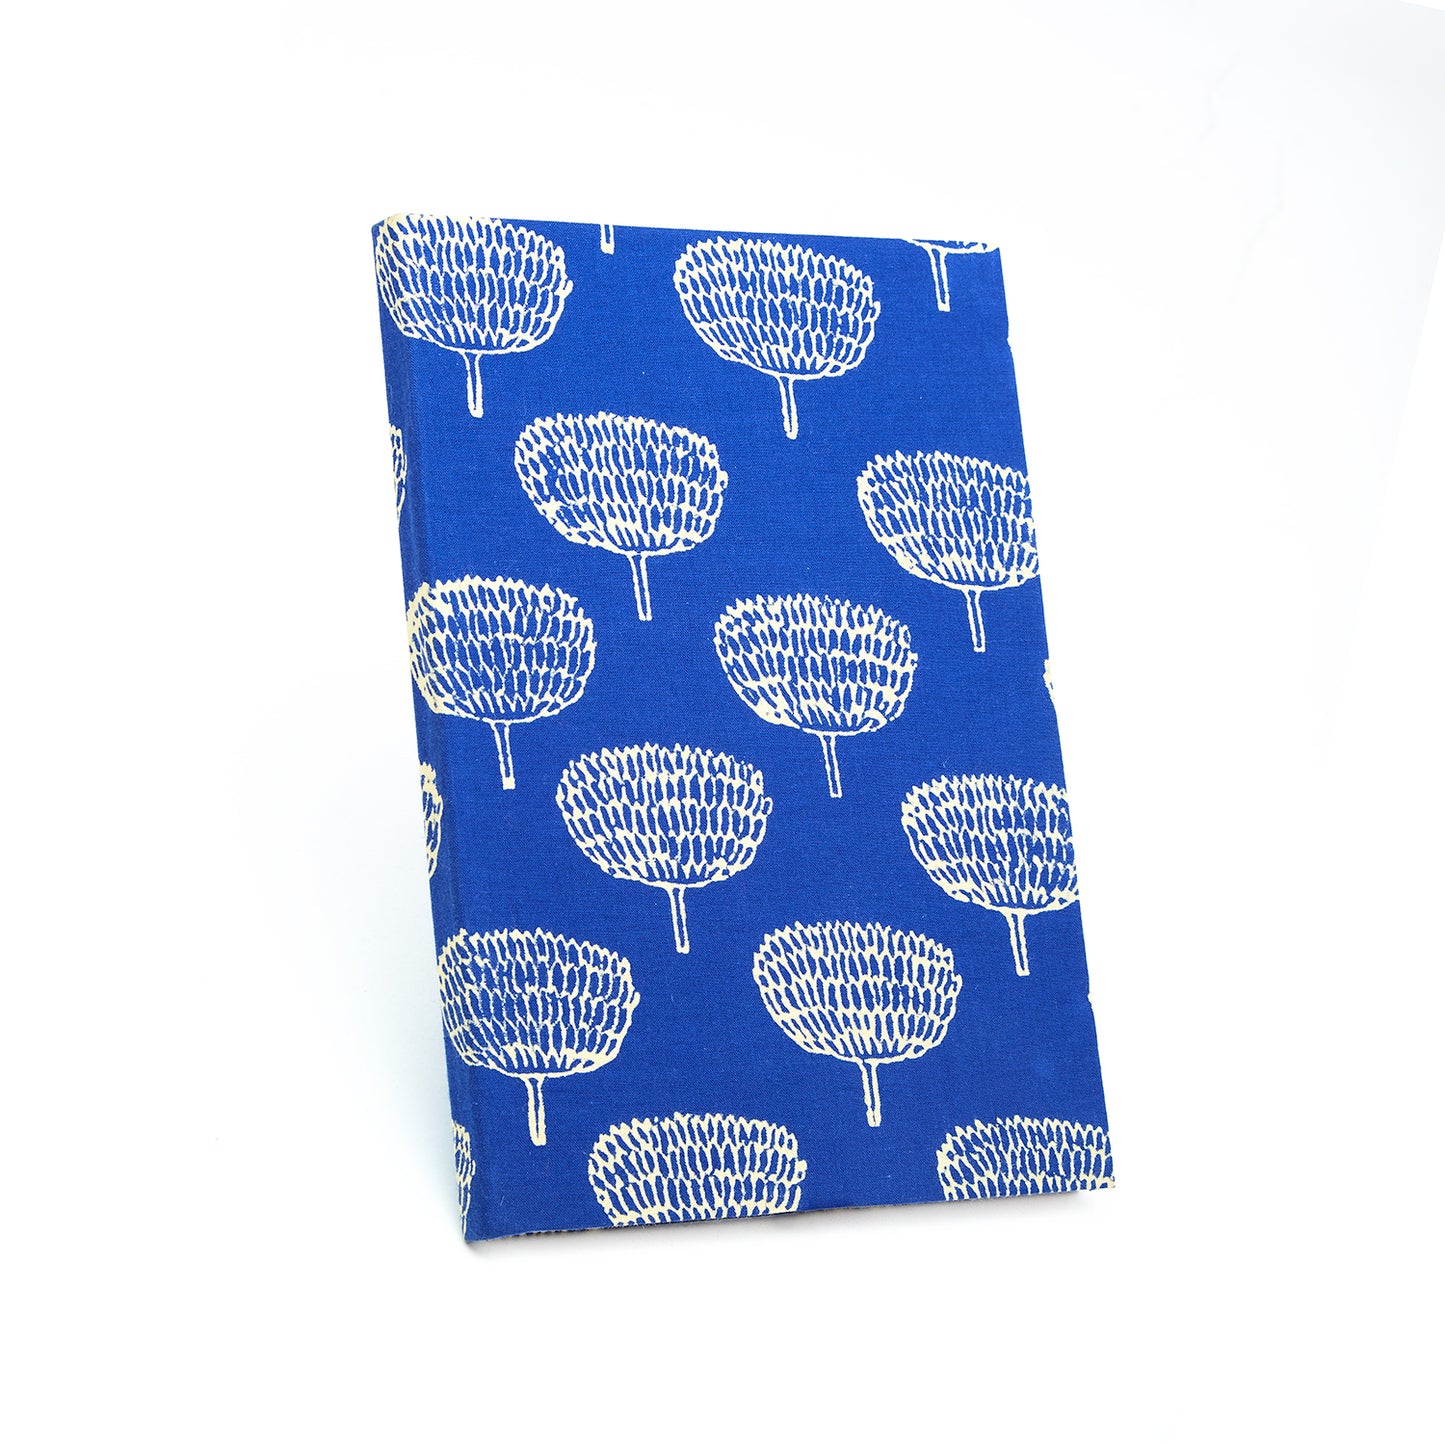 Cobalt Blue Color with Ethnic Design - Regular Size Diary